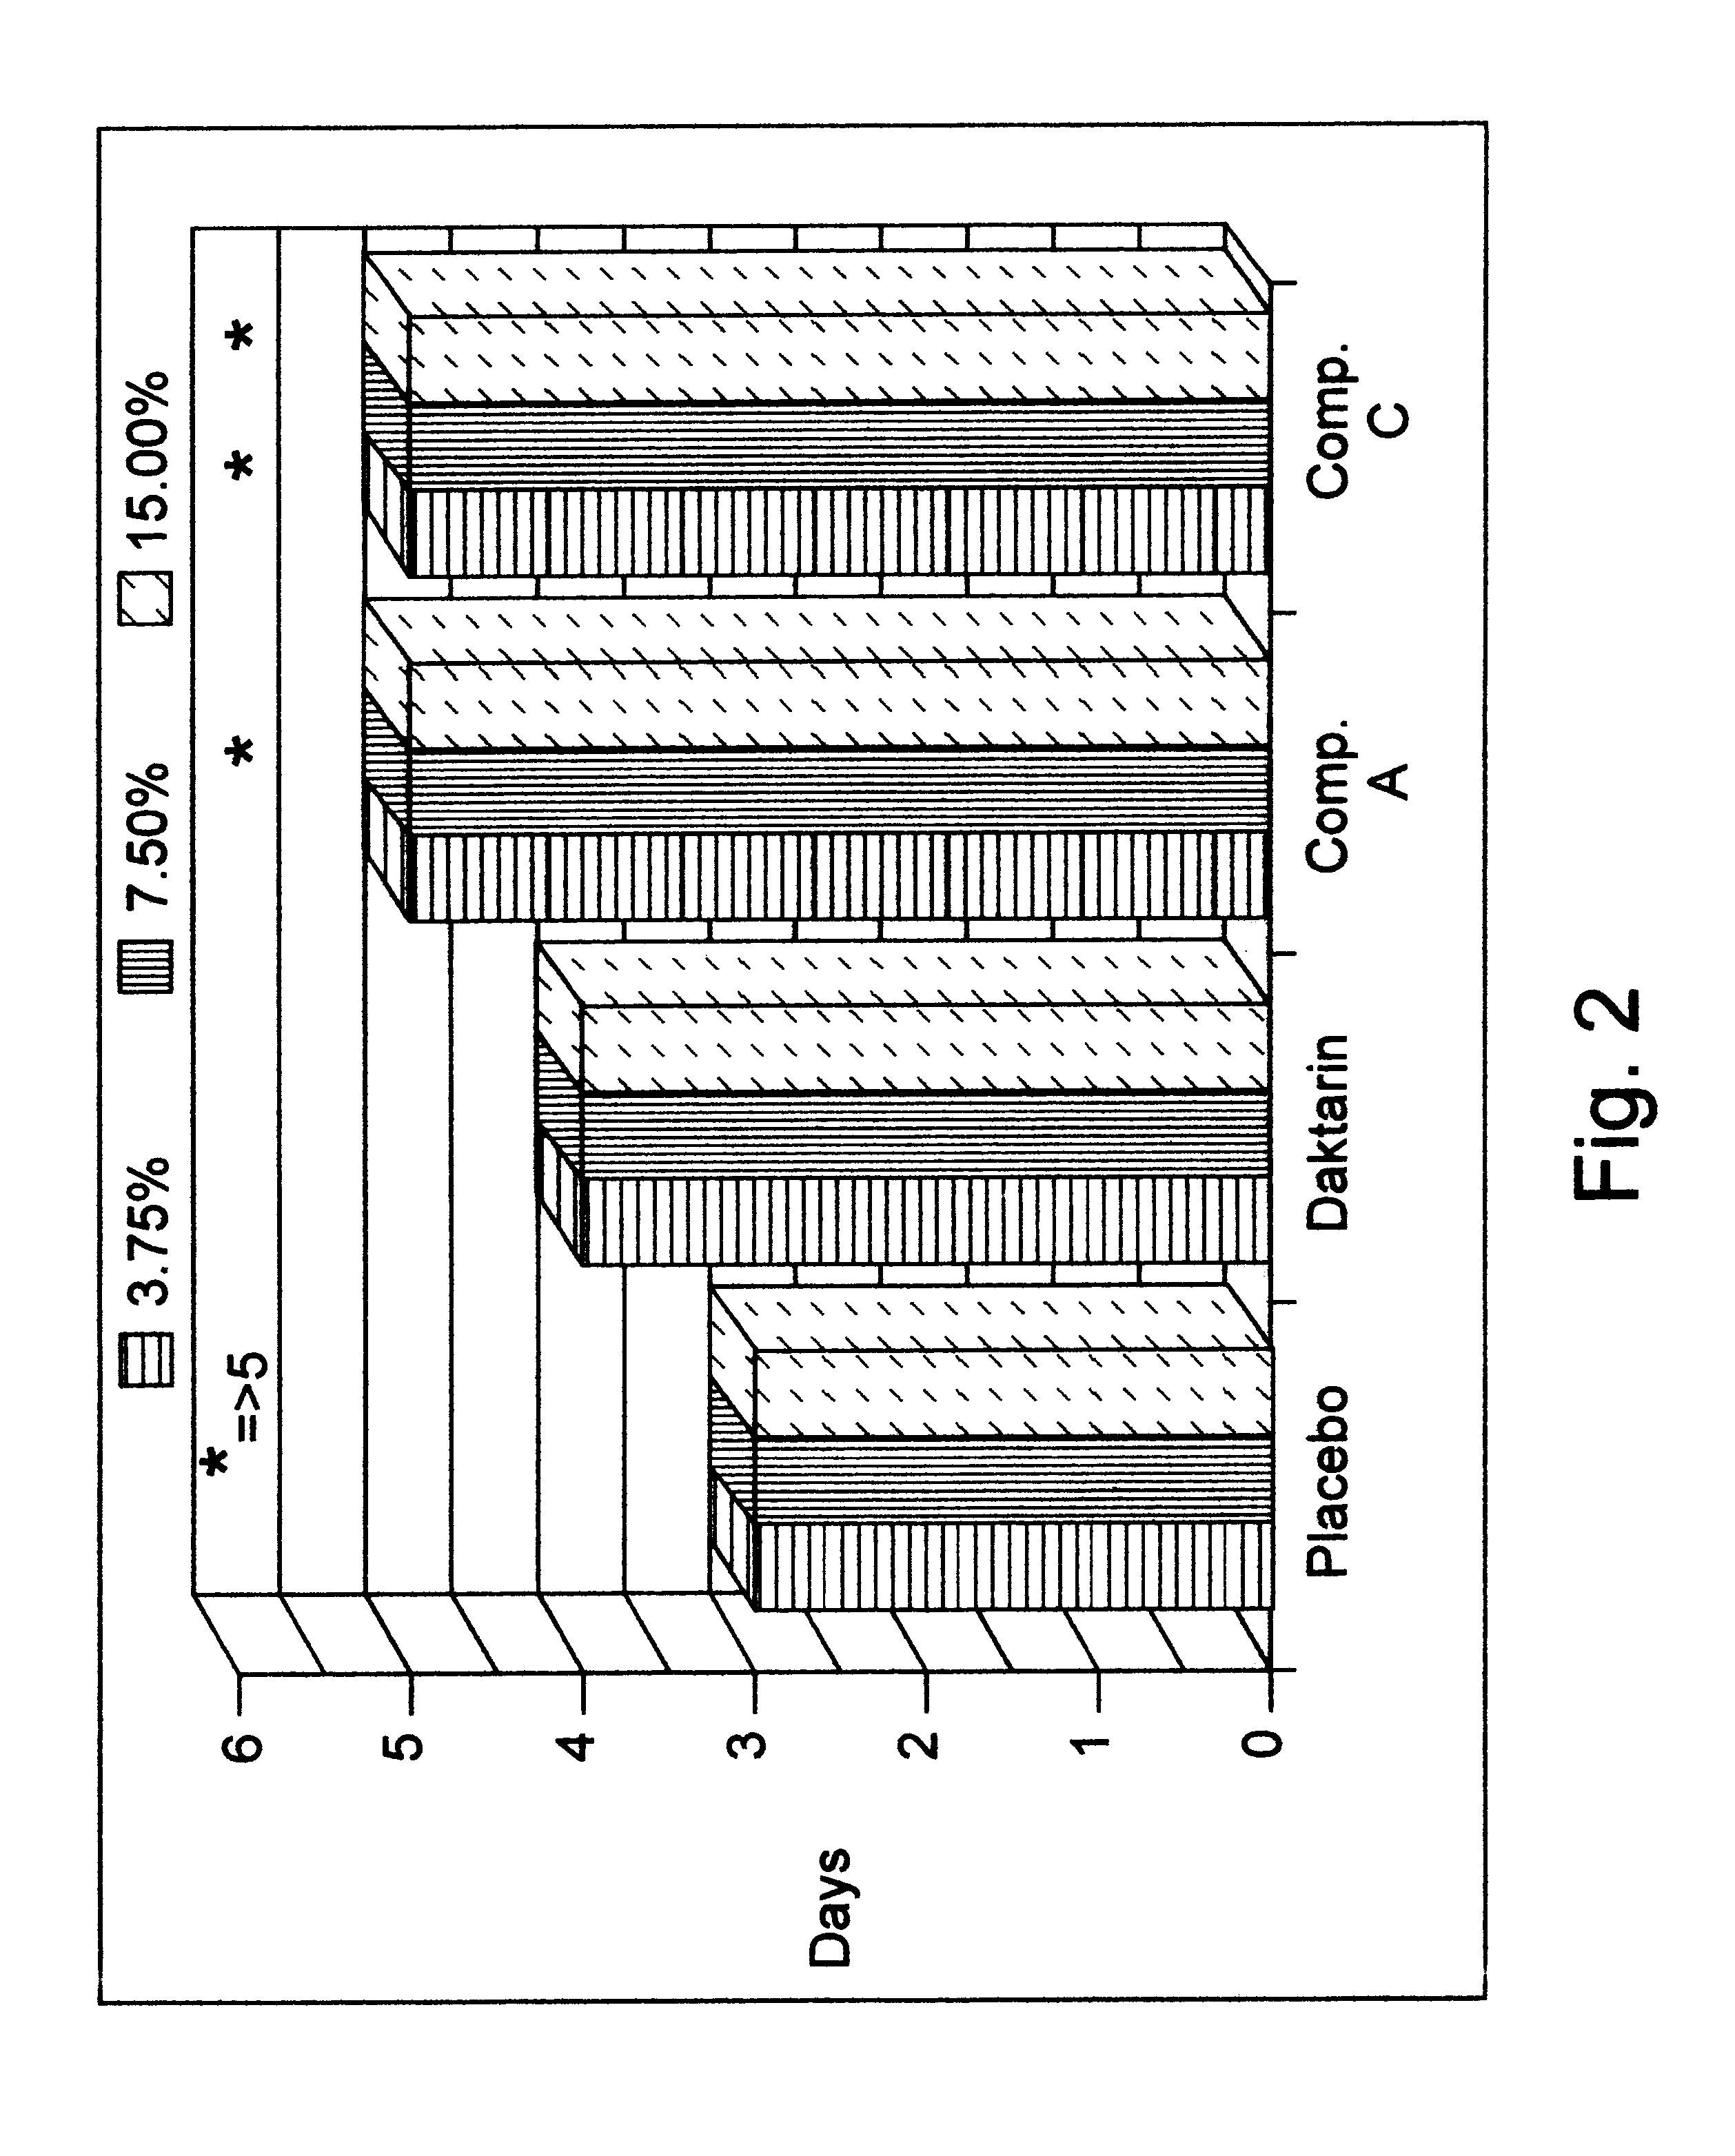 Anti-fungal compositions with prolonged activity